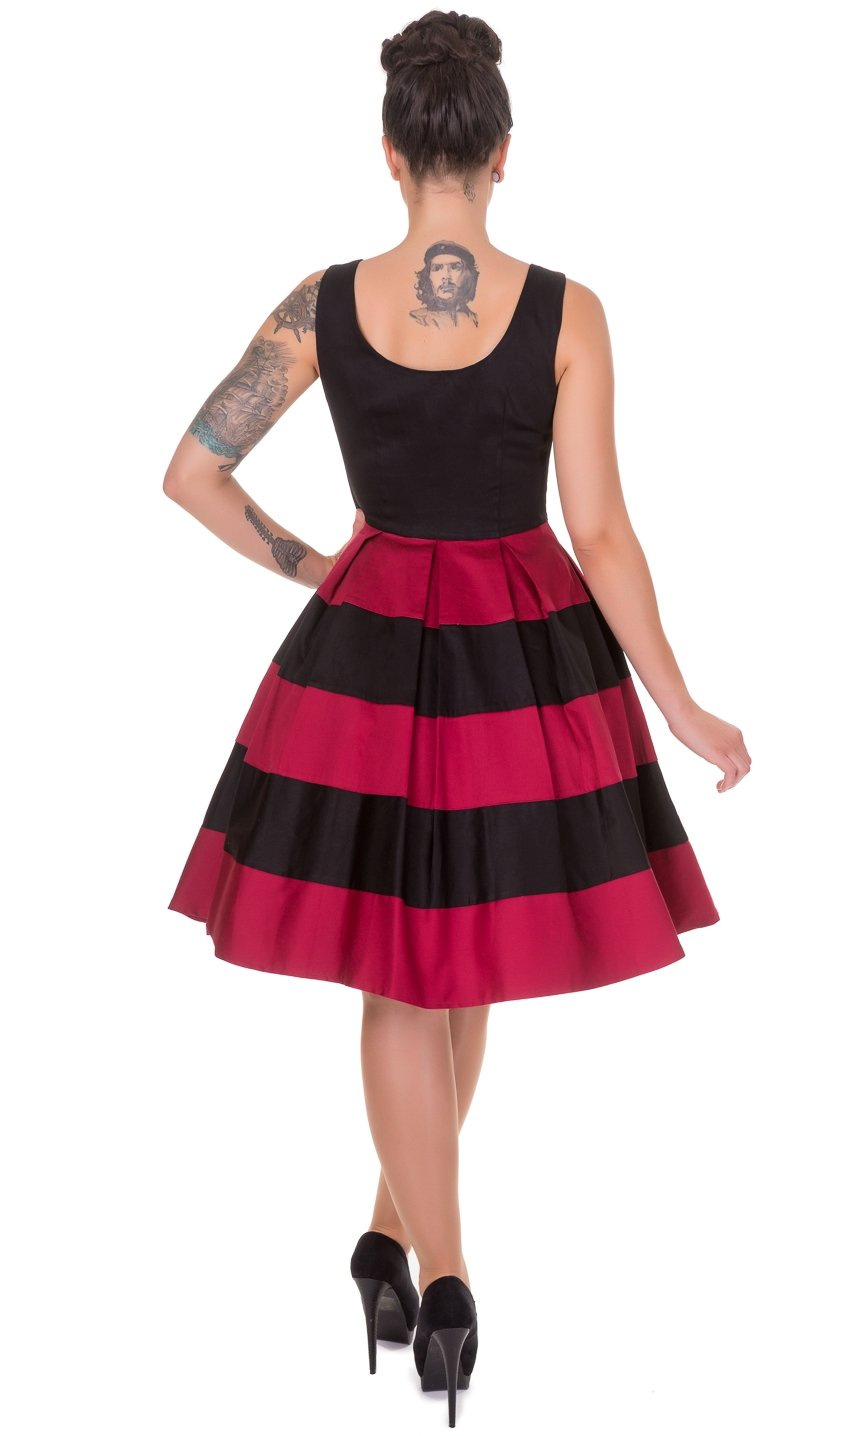 Model wearing black and red striped sleeveless dress, back view